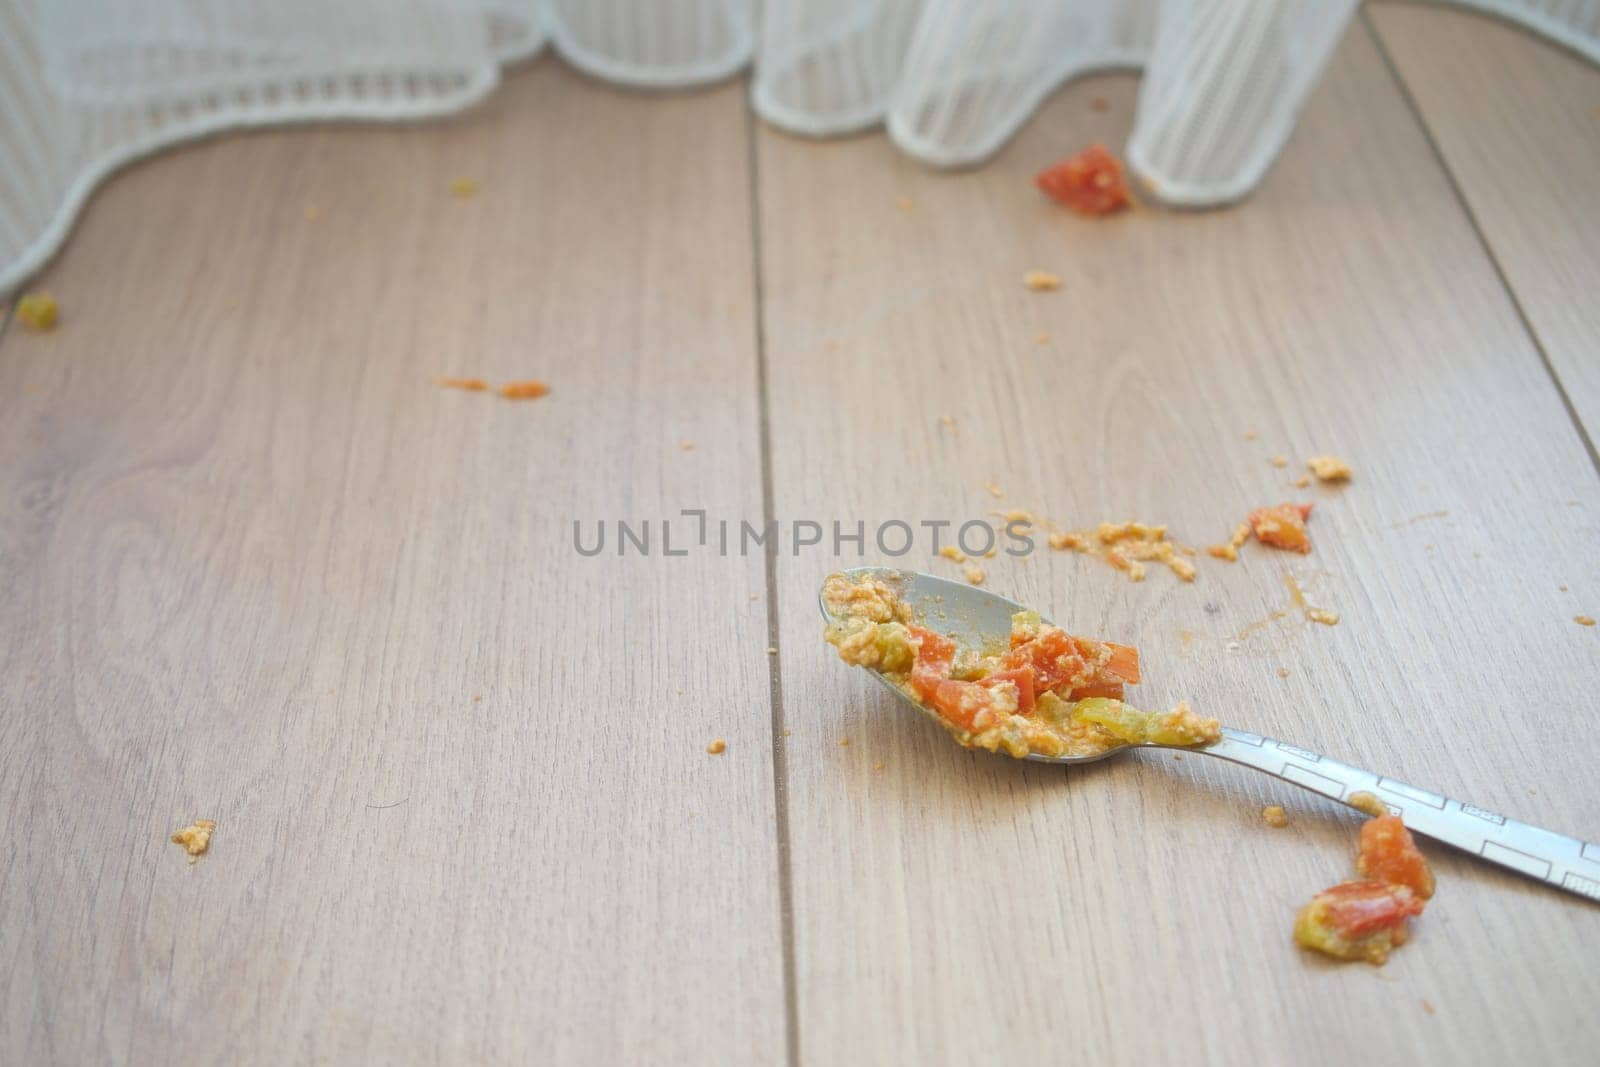 leftover snack with spoon on wooden floor by towfiq007